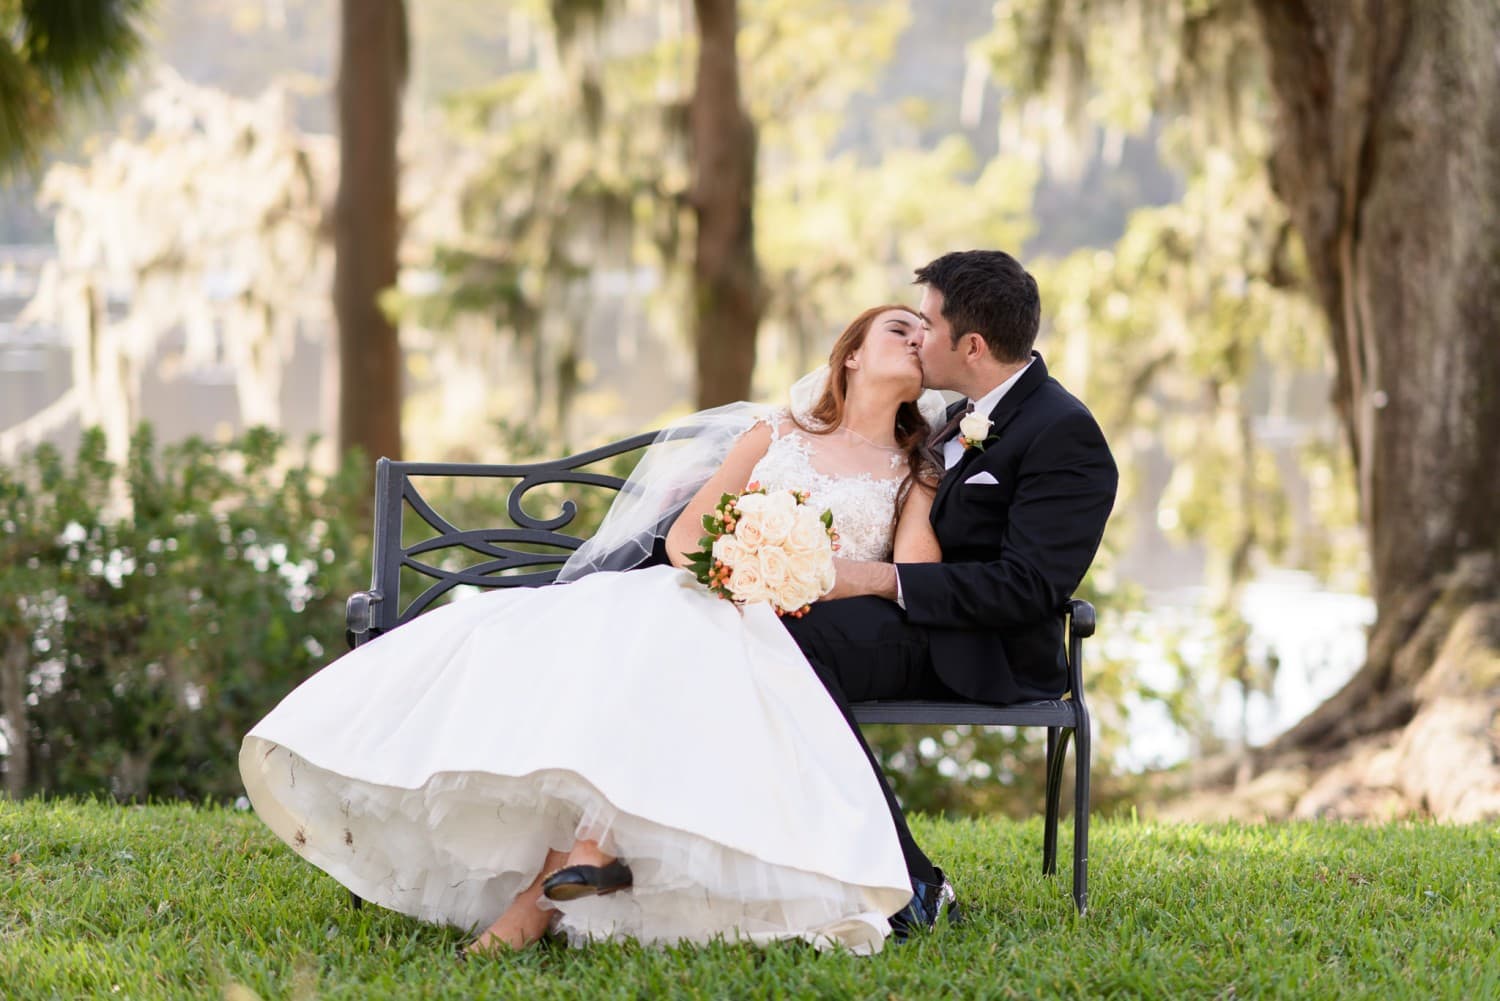 Bride leaning back against groom on a garden bench - Wachesaw Plantation